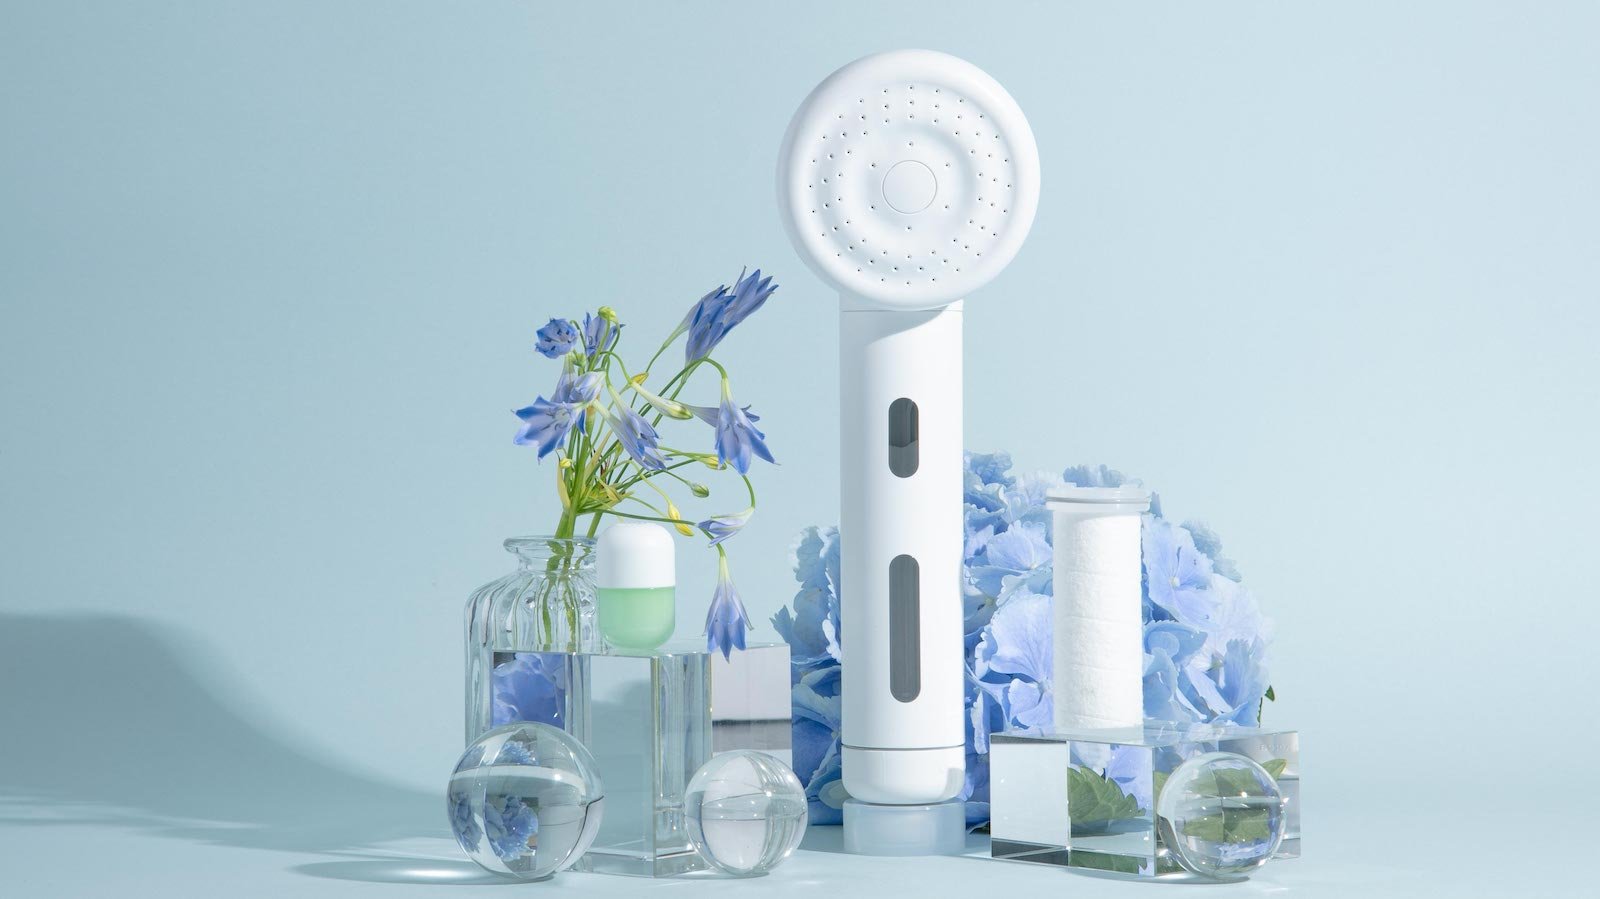 H201 SHIFT The Starter Kit aromatherapy shower head takes your showers to the next level